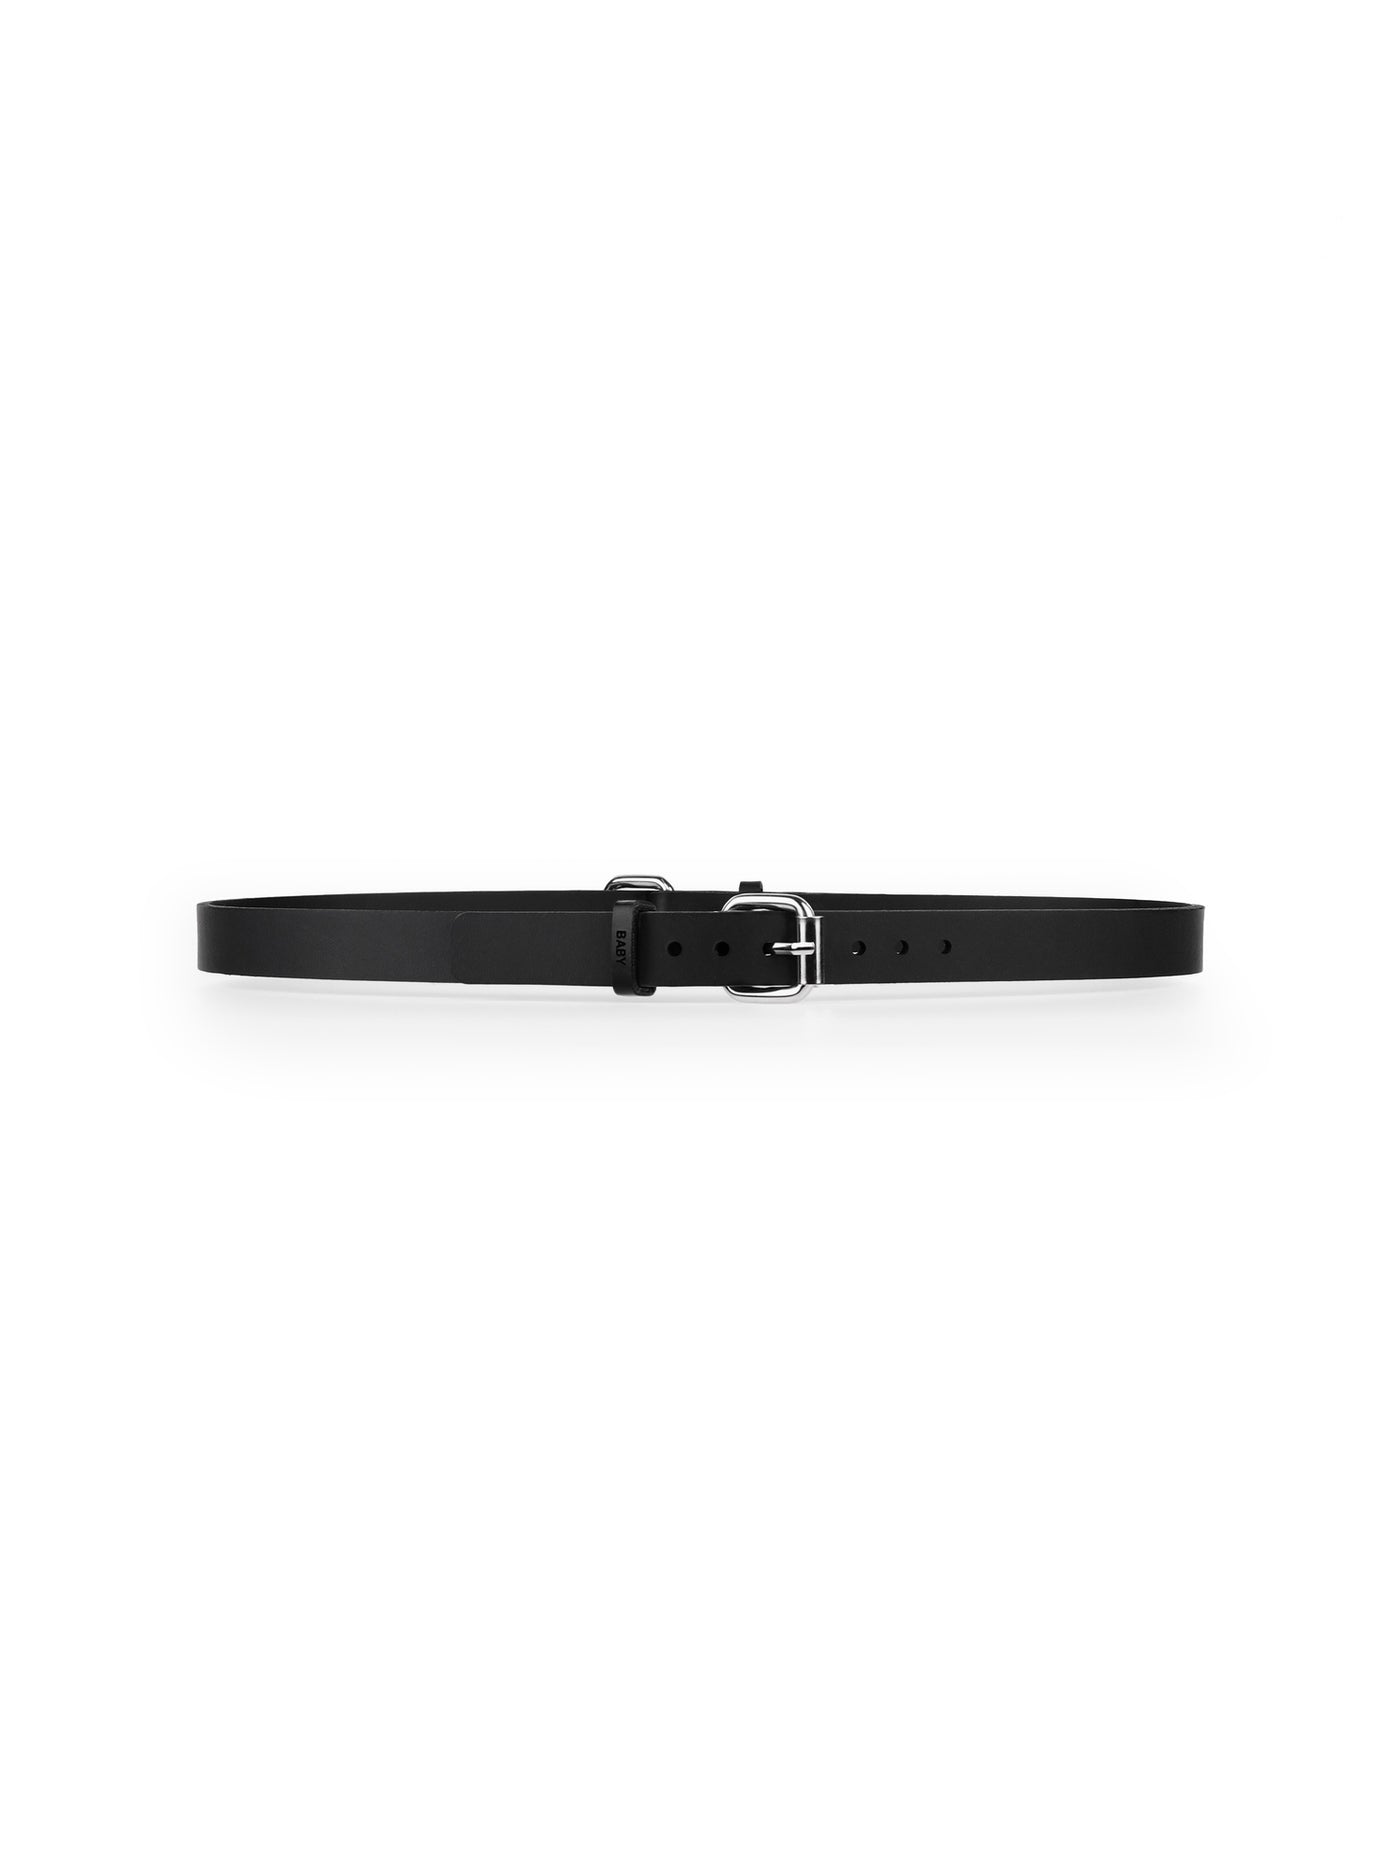 Front view of the Emmy vegan leather belt by Baby turns Blue Paris